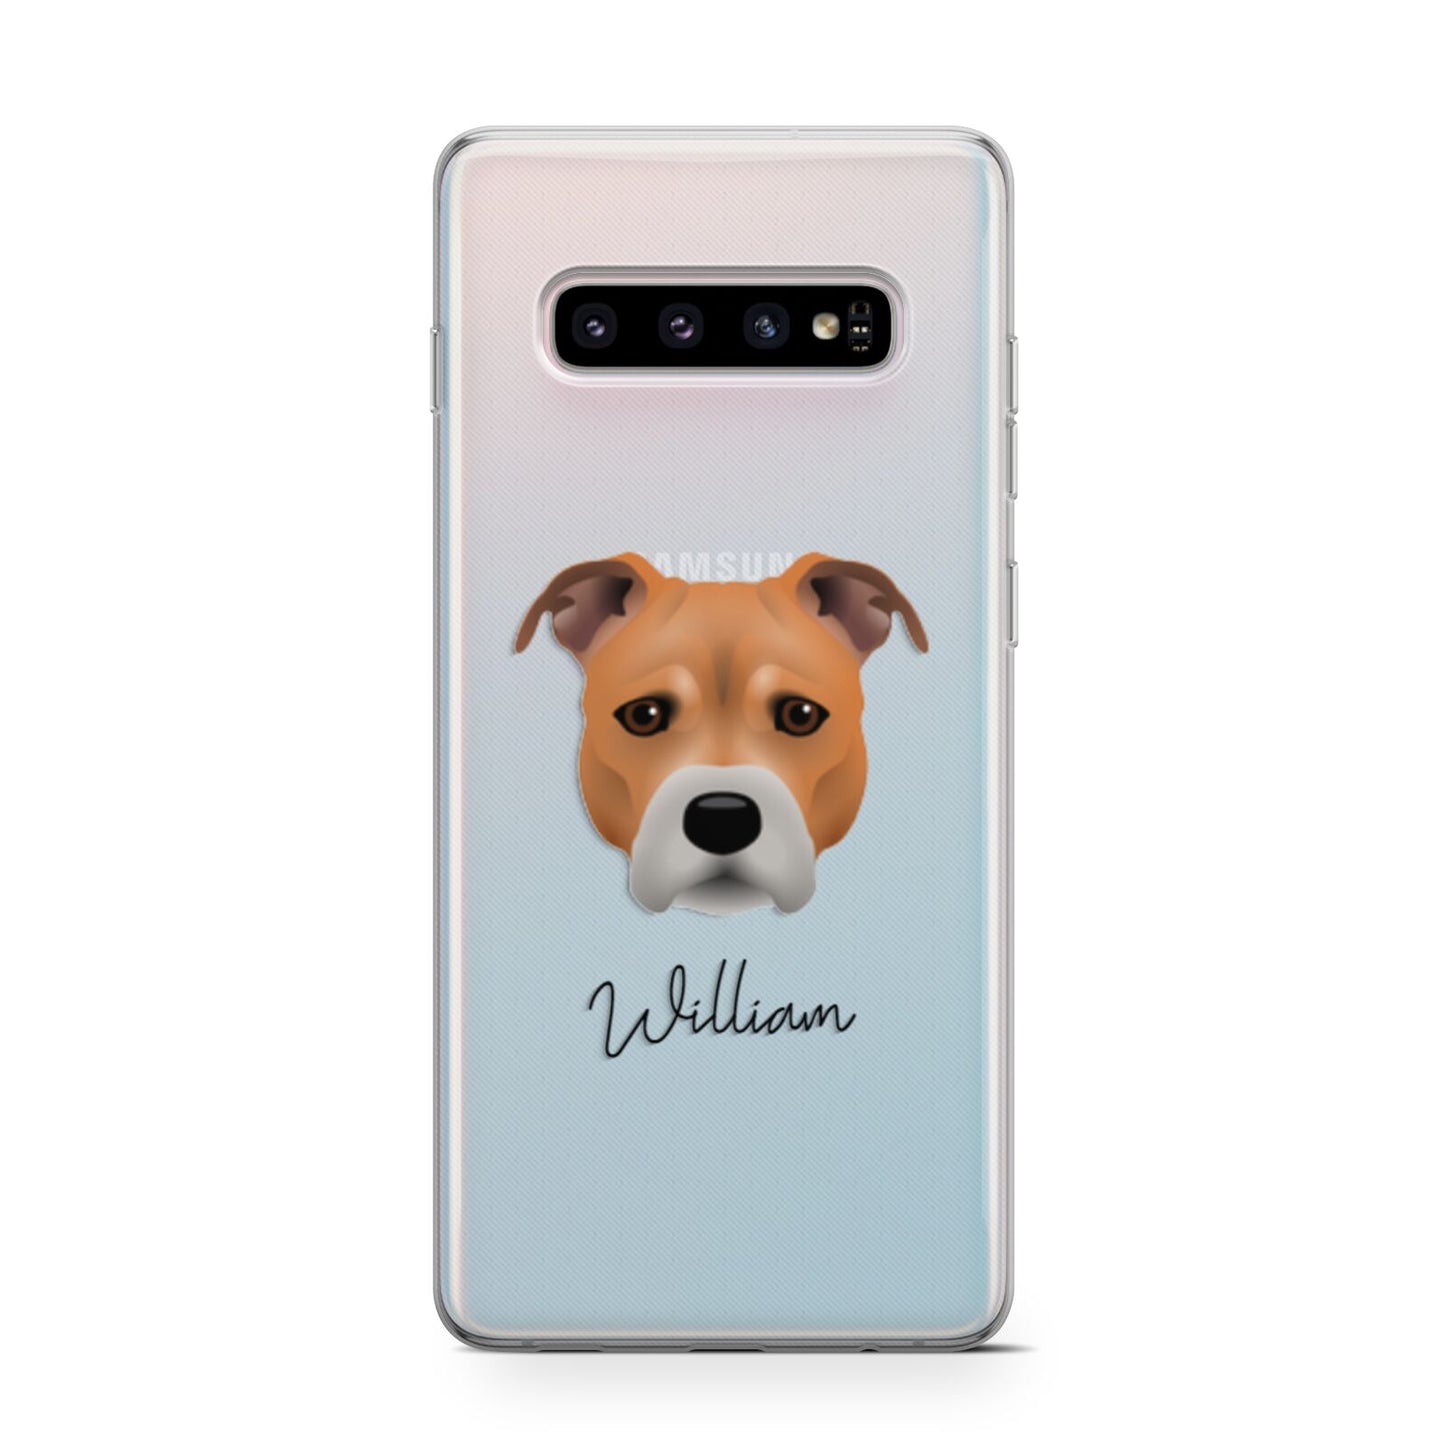 Staffordshire Bull Terrier Personalised Samsung Galaxy S10 Case